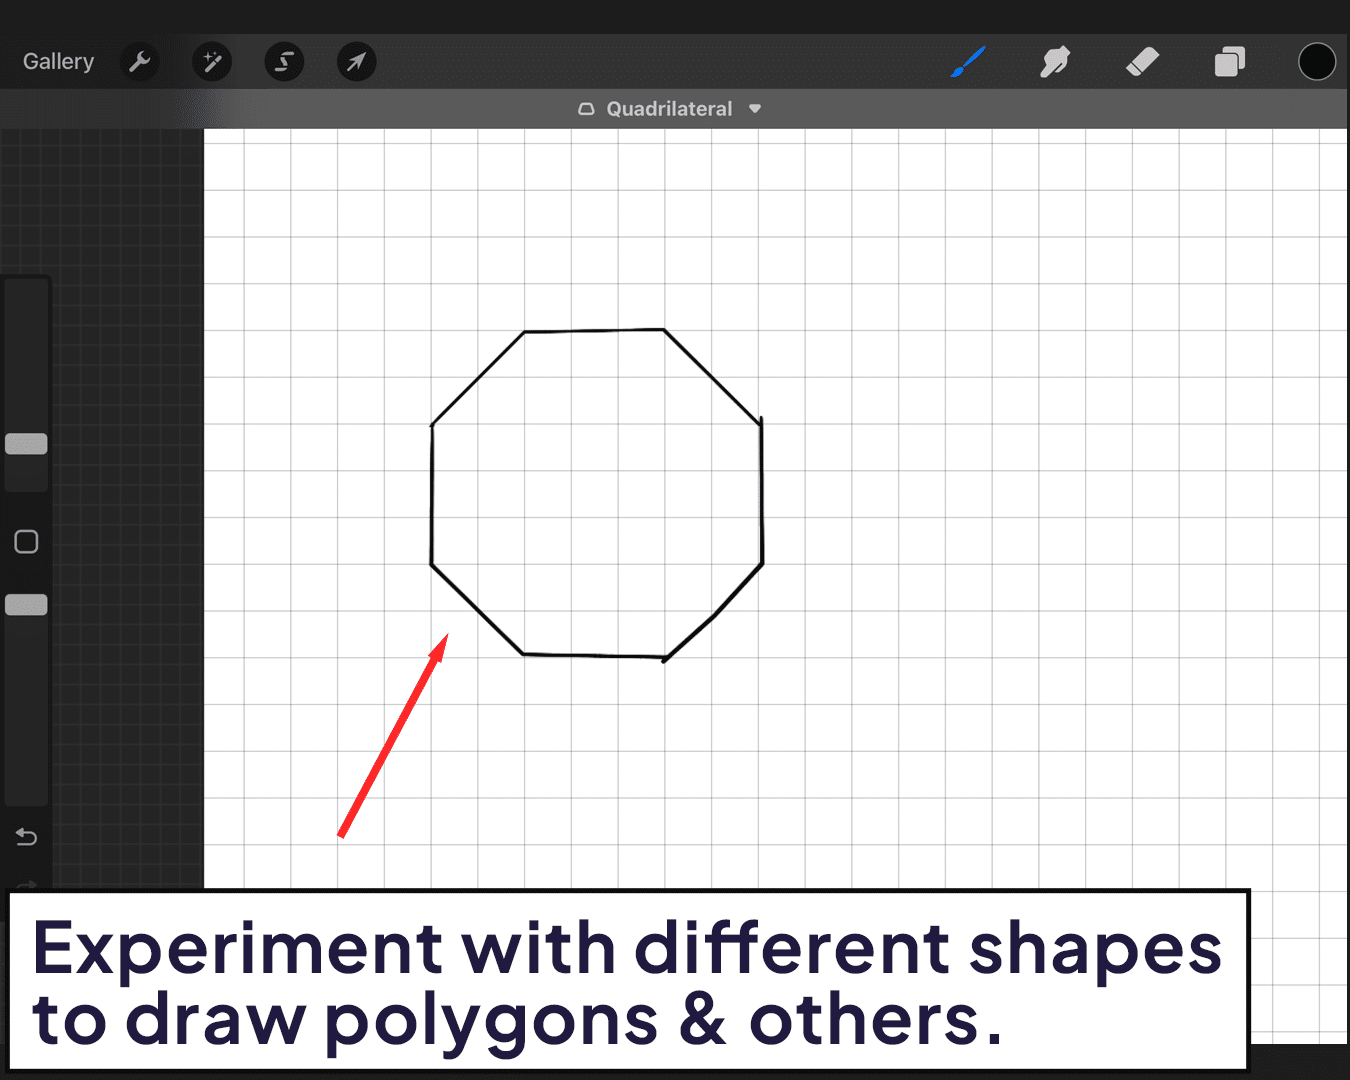 Drawing polygons & others